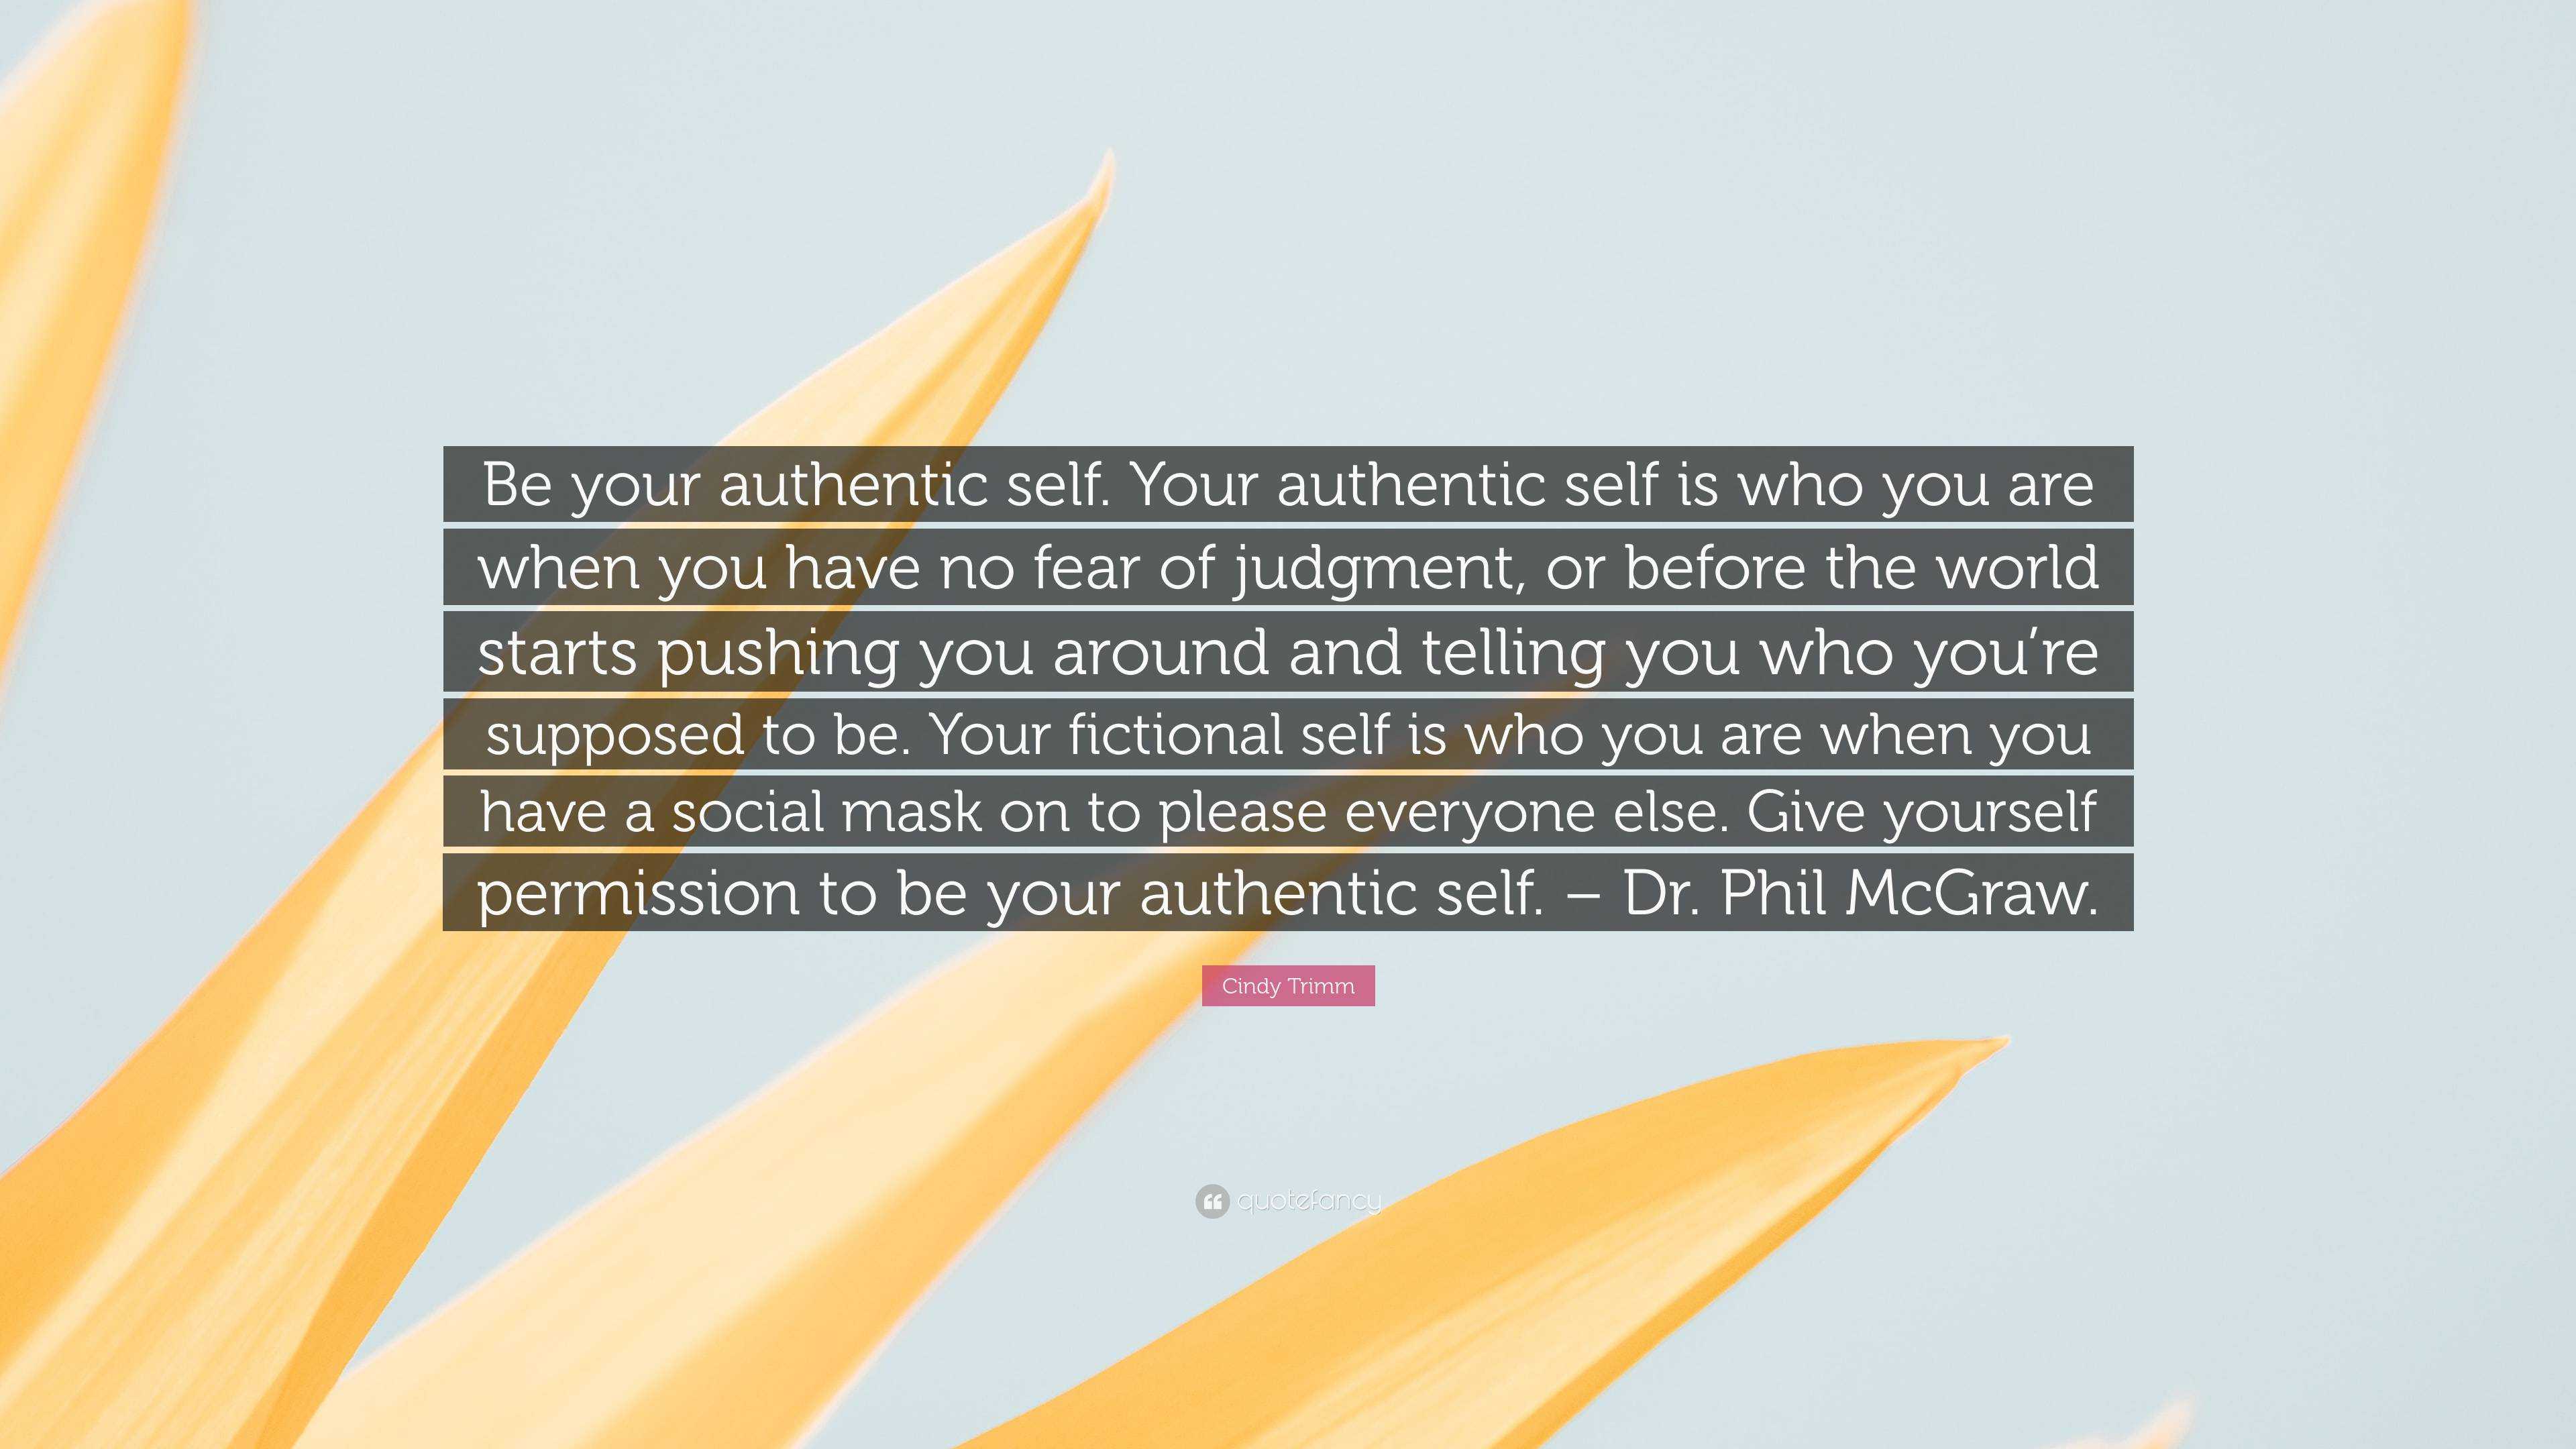 Are You Getting the Most Out of Your Authentic